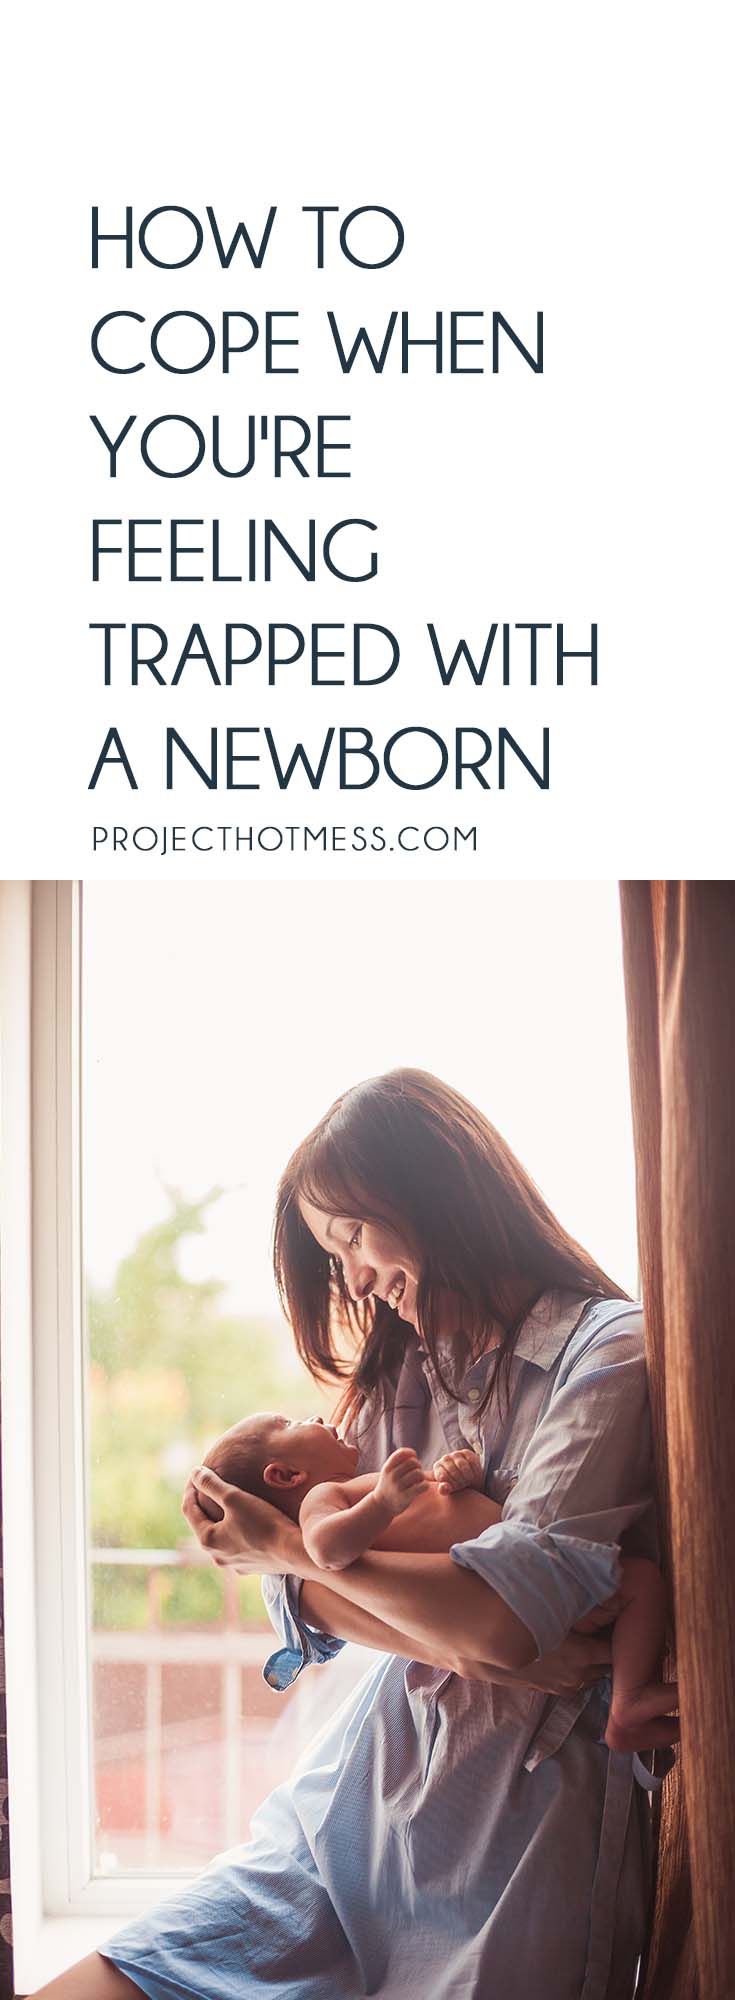 Your little baby has finally arrived - it's everything you dreamed of... and some things you didn't. It's not unusual to find yourself feeling trapped with a newborn, stuck at home, overwhelmed with leaving the house and not quite sure what to do. Here's how you can cope. #motherhood #newborn #afterpregnancy #baby